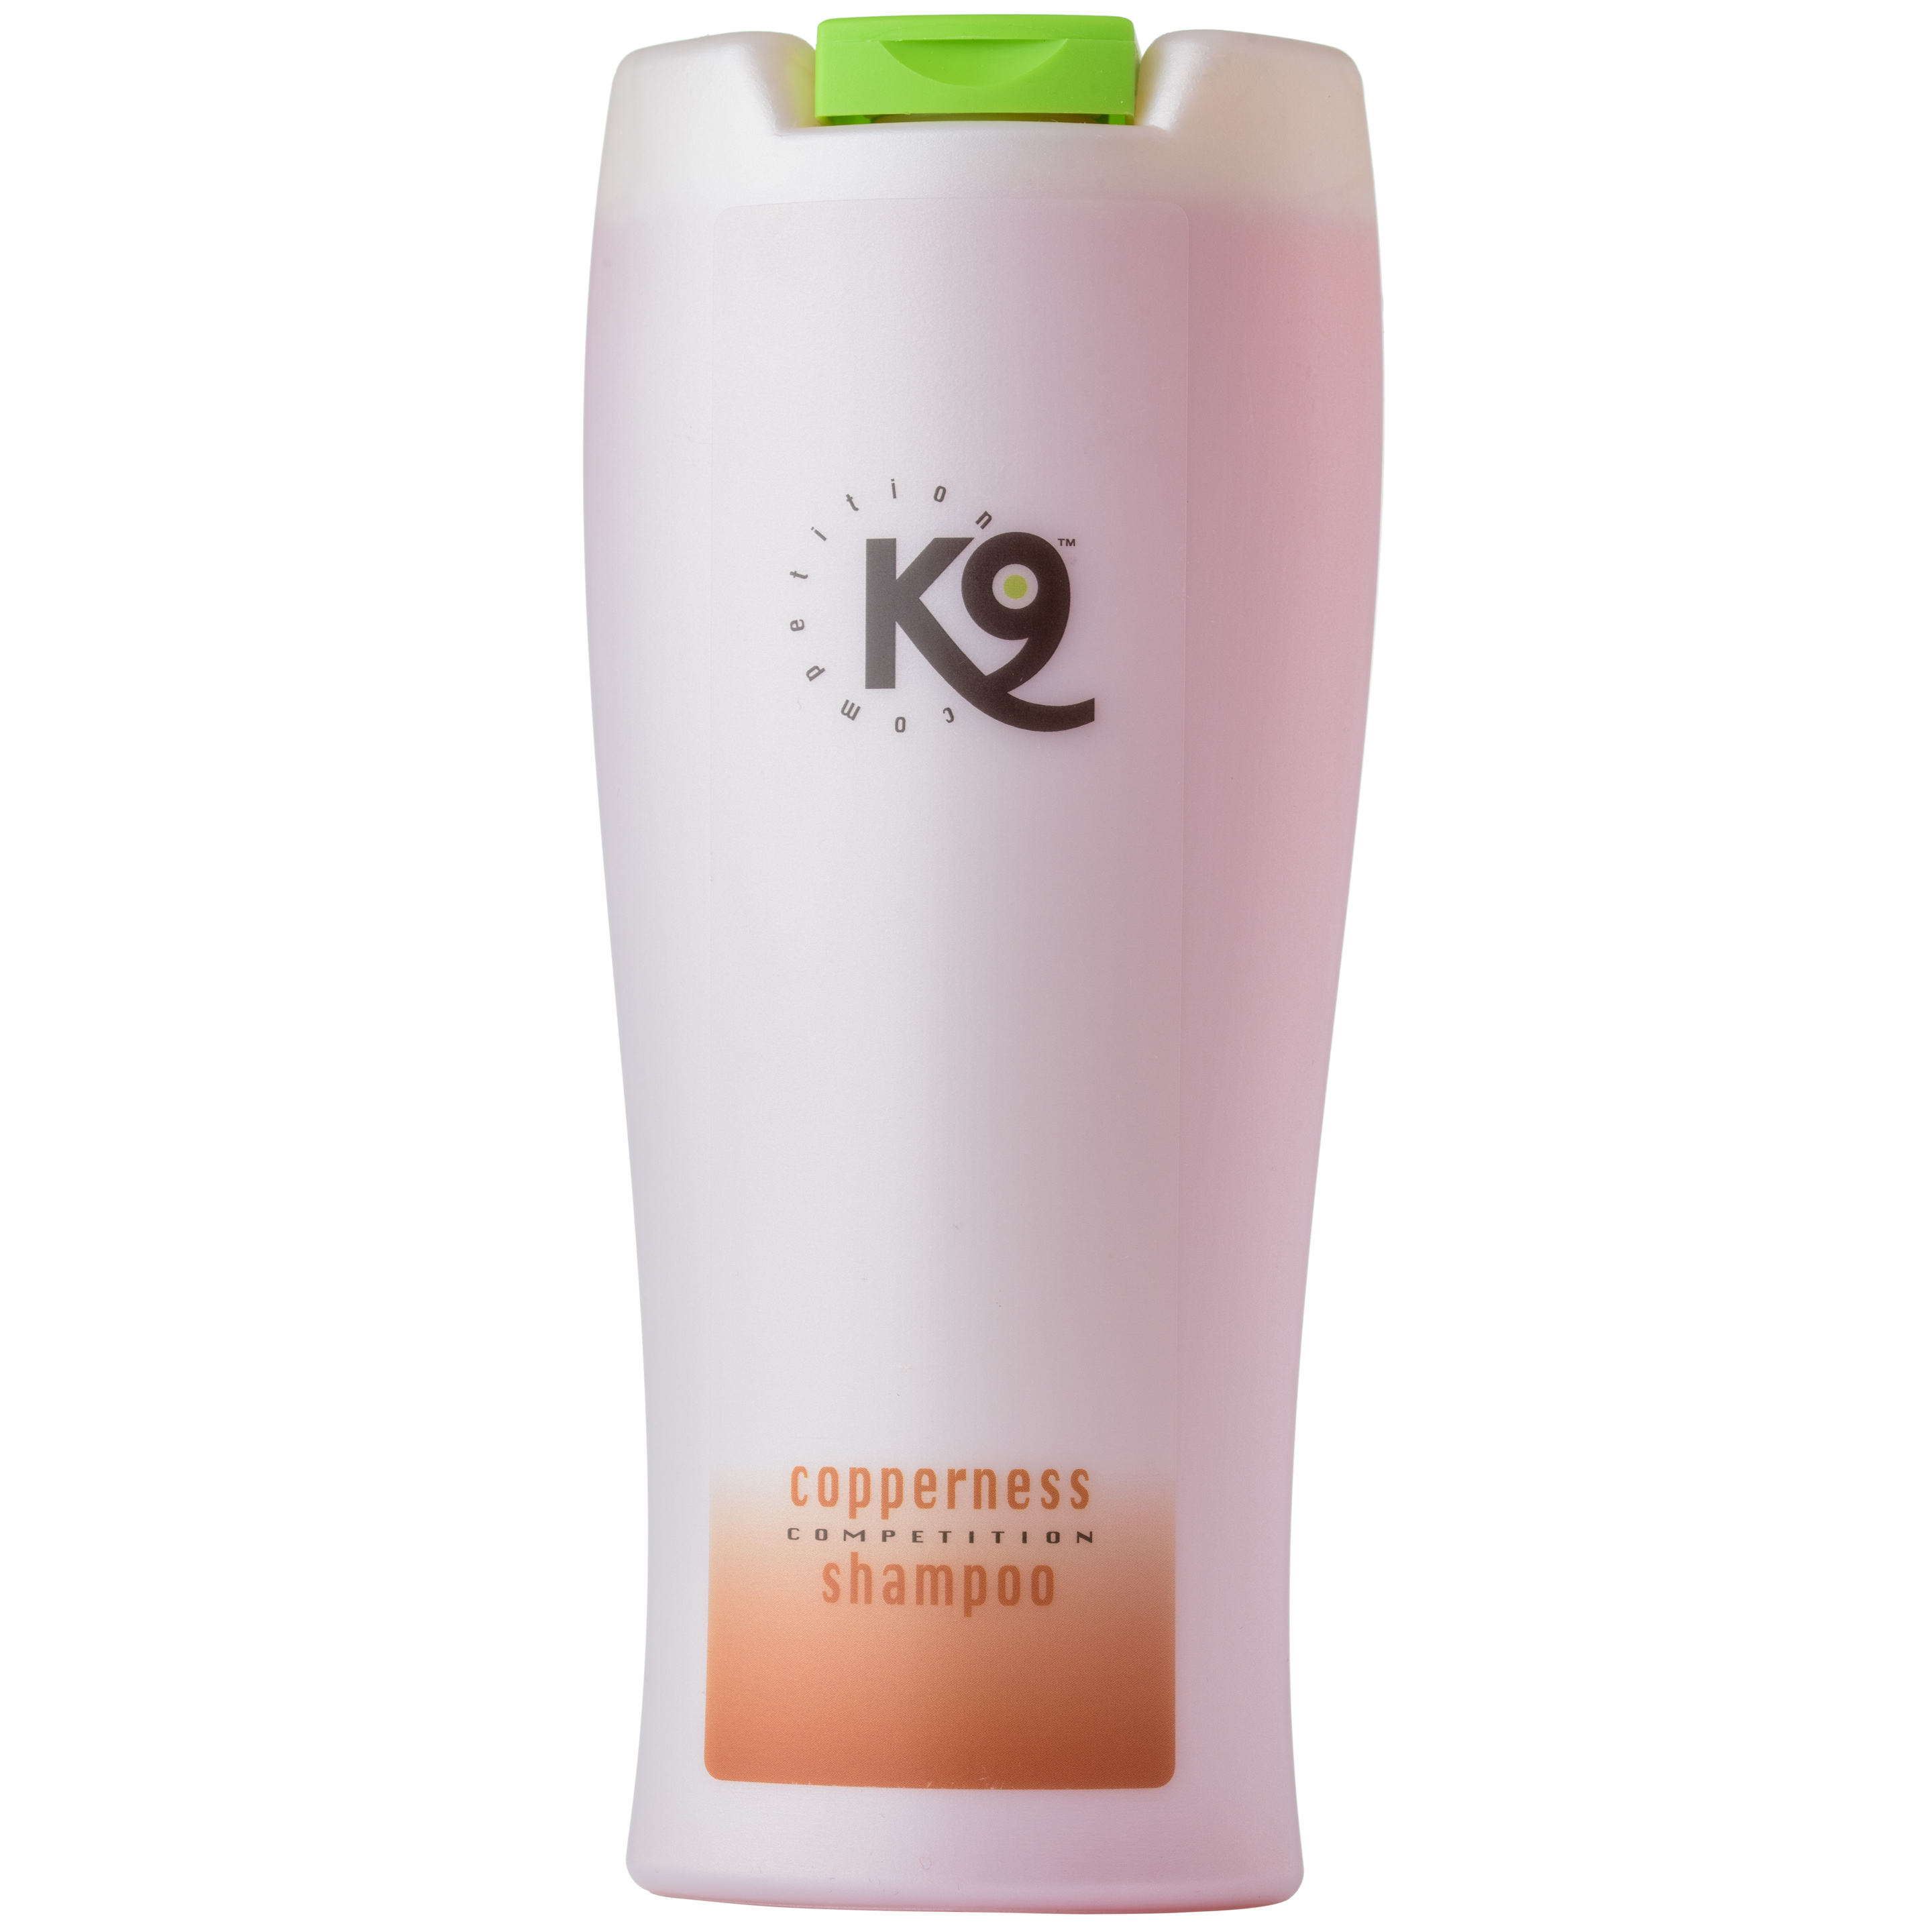 K9 Copperness Shampoo - For Brown and Pet Hair, Concentrate 1:10